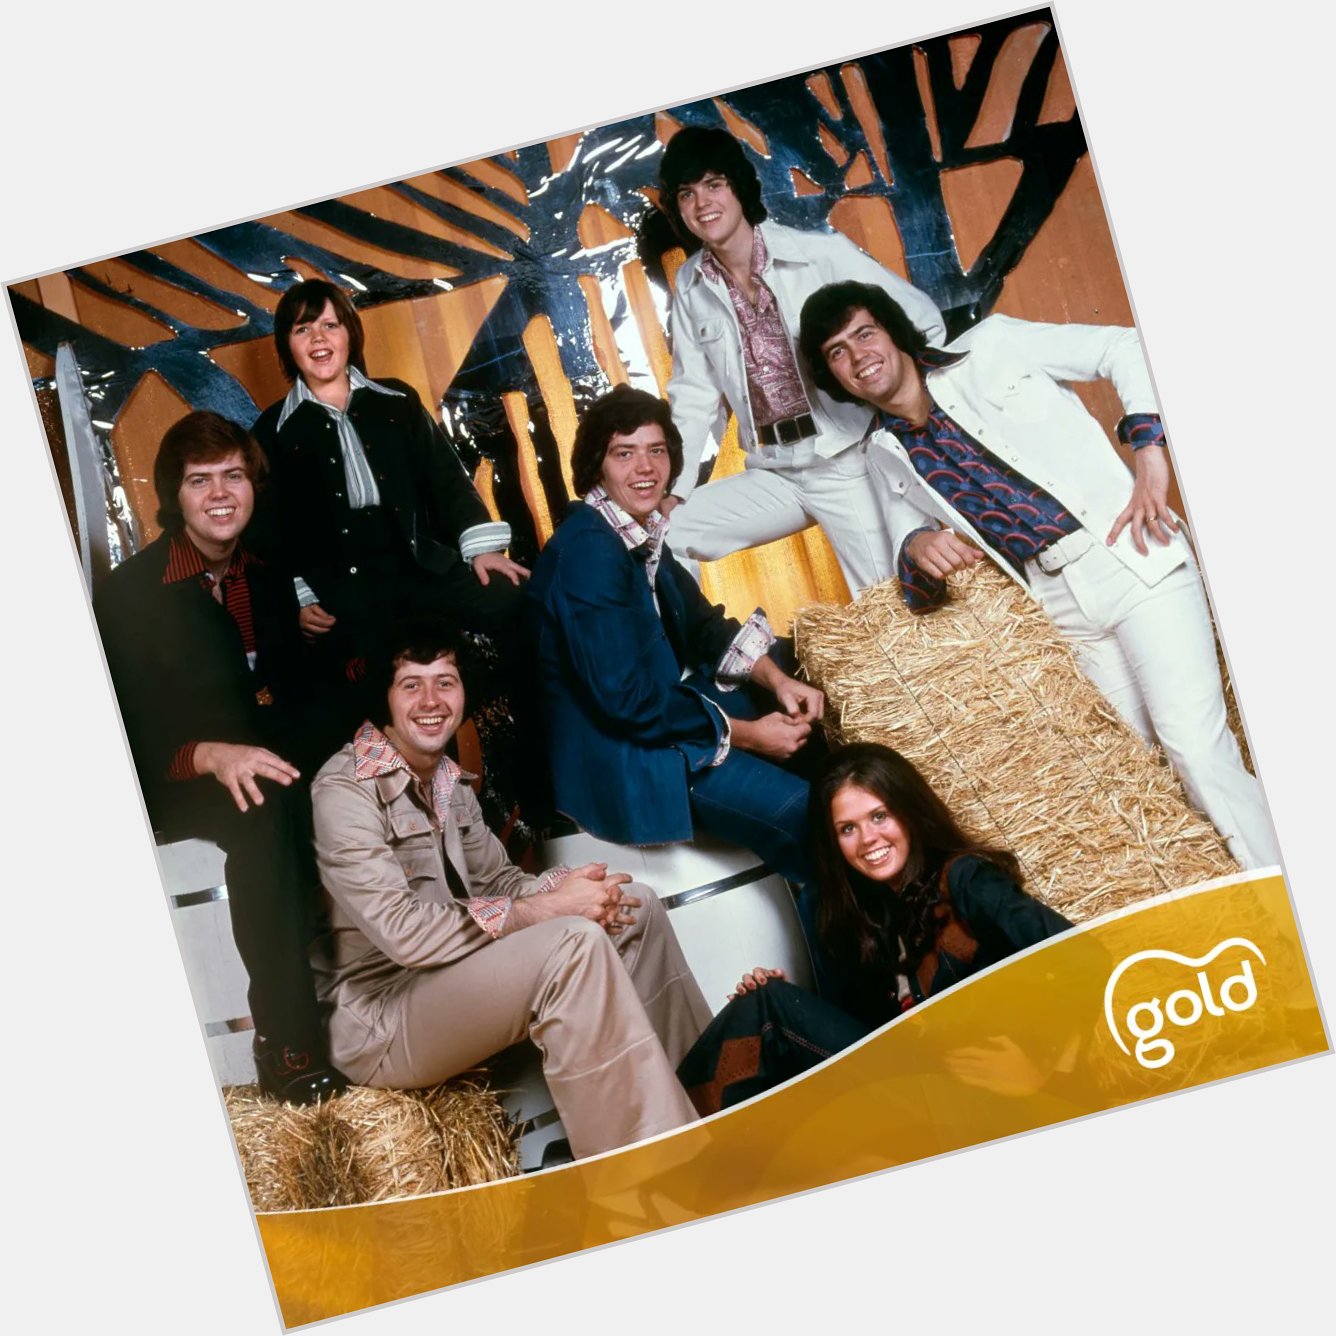 Happy 59th birthday, Jimmy Osmond! Here he is with his fellow Teen Idol siblings back in the \70s. 